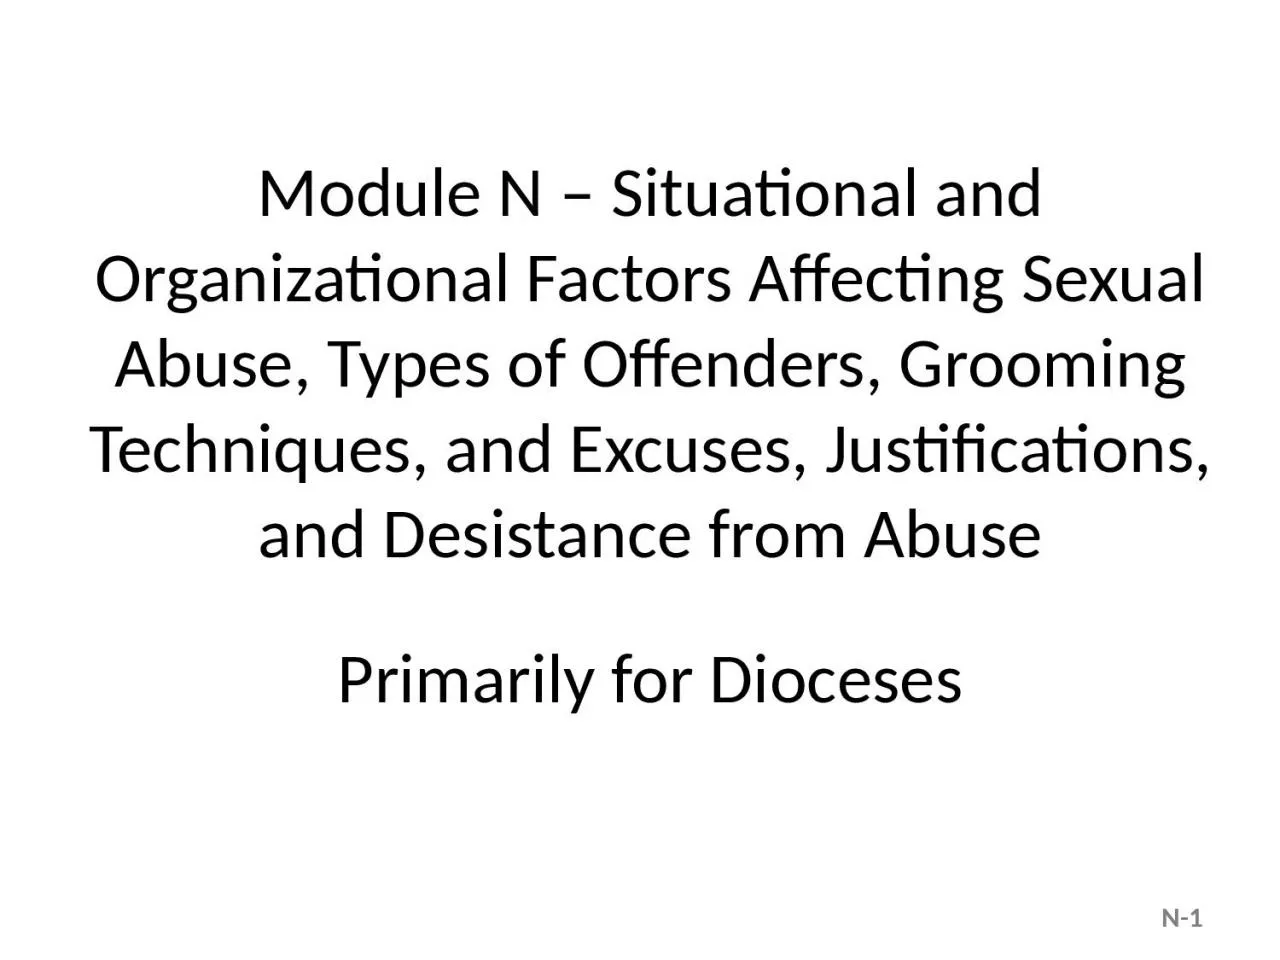 Module N – Situational and Organizational Factors Affecting Sexual Abuse, Types